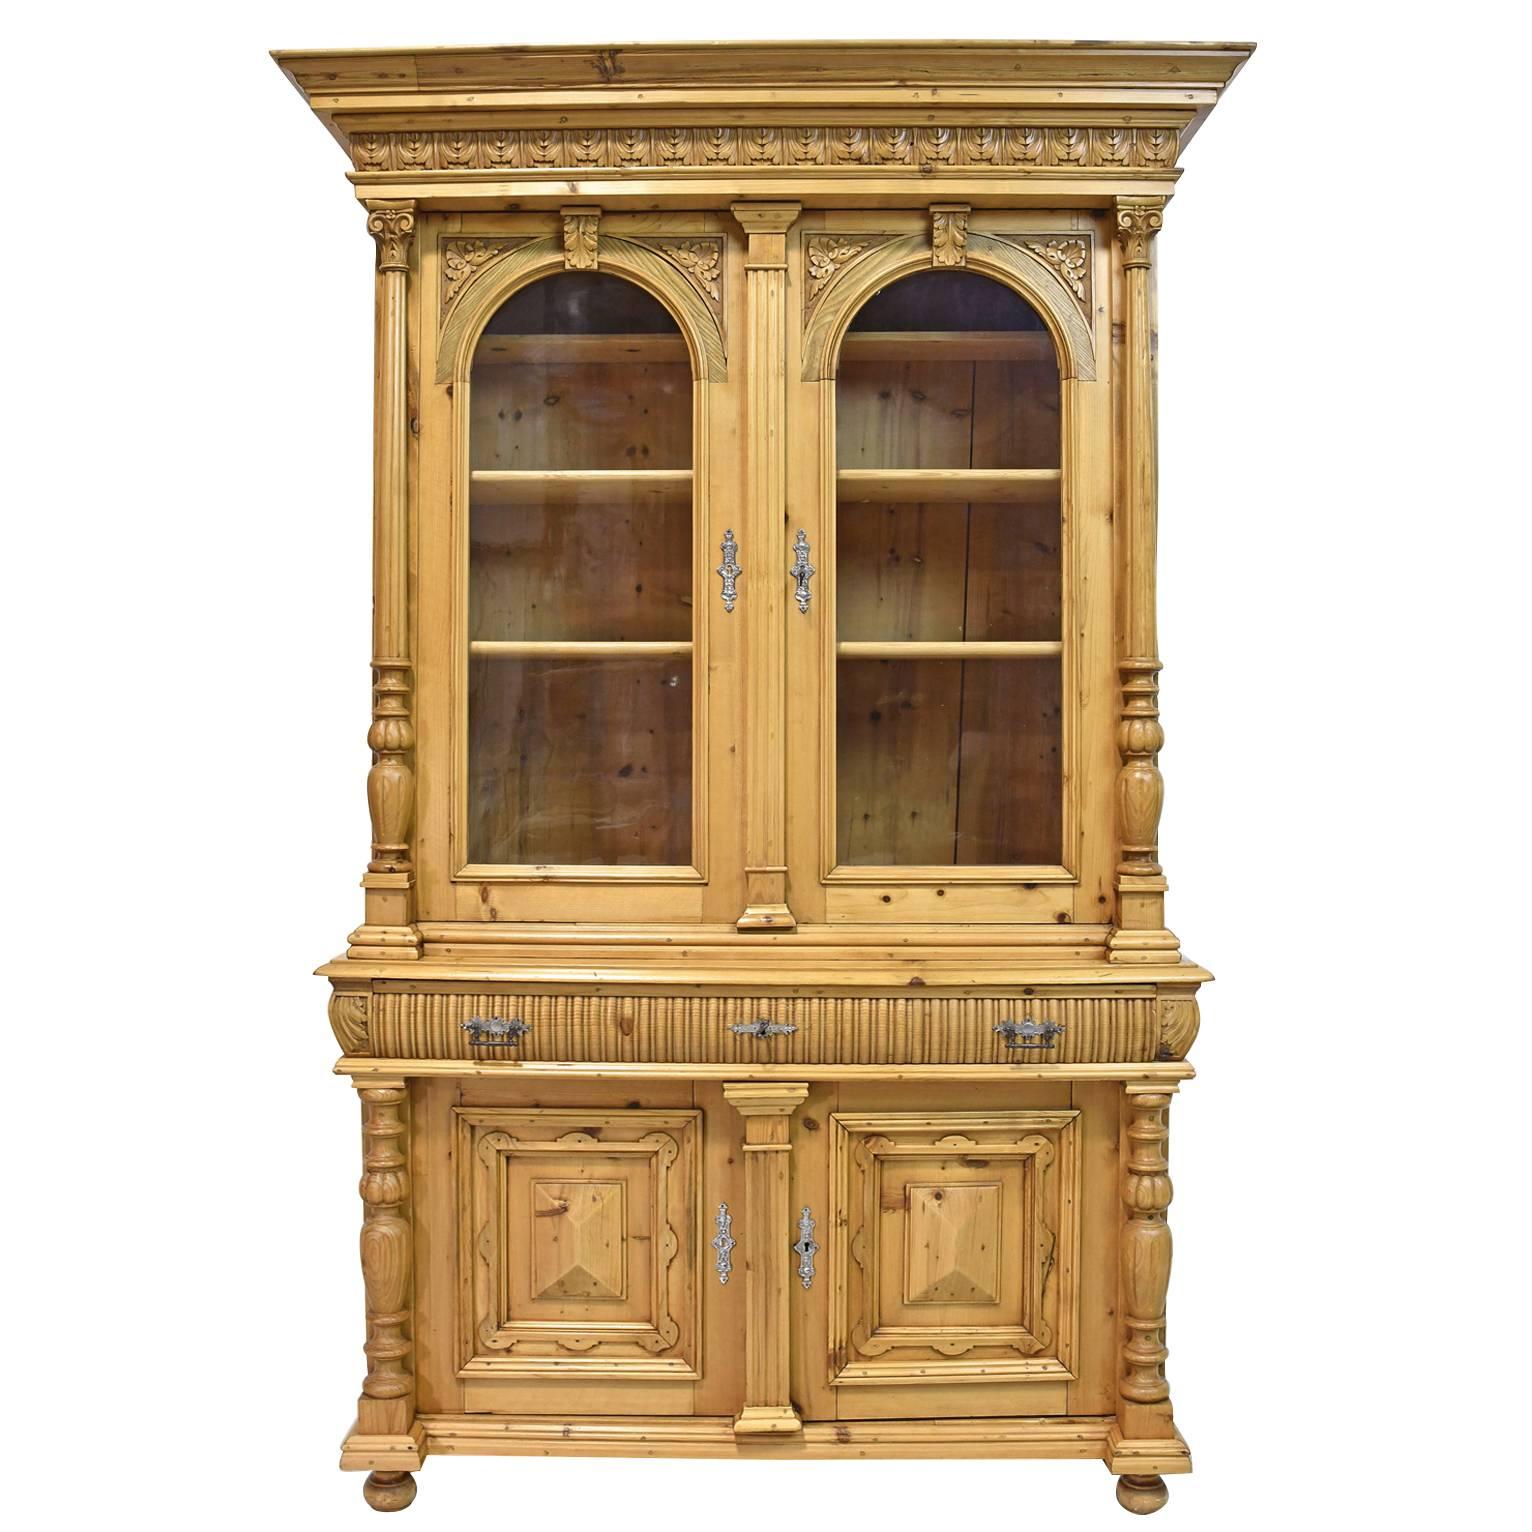 Large Pine Belle Époque Bookcase or Buffet from Bohemia, c. 1880